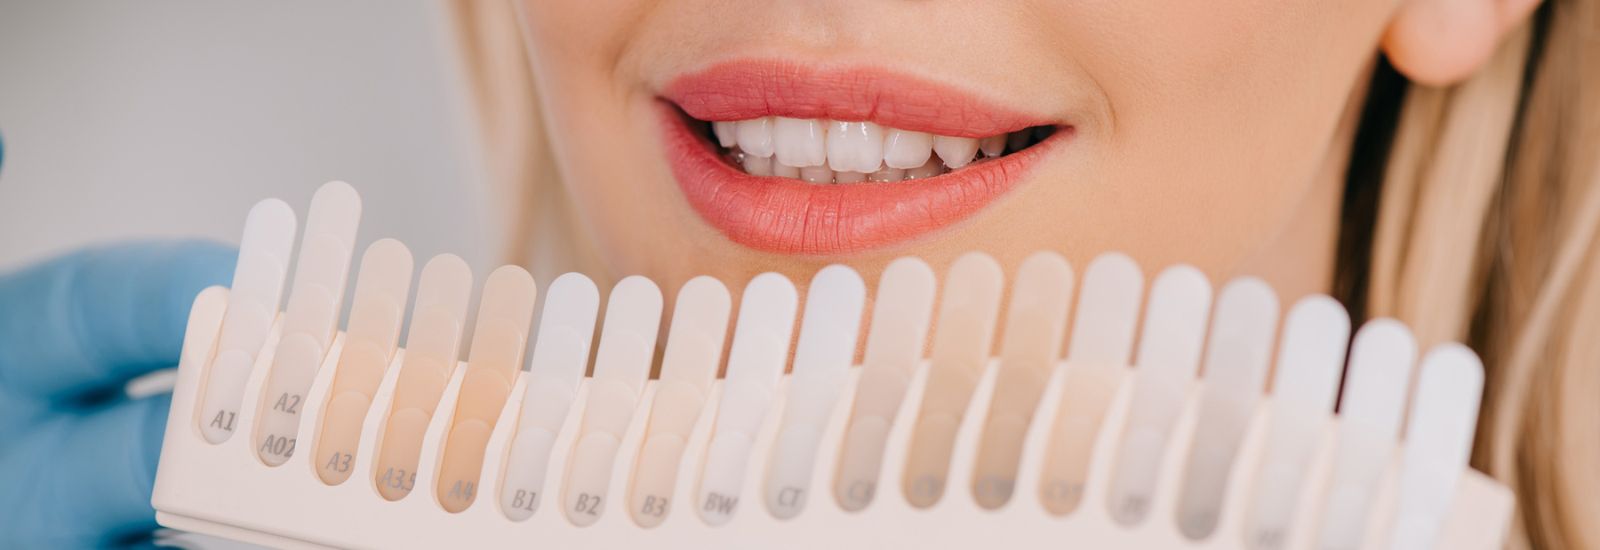 Teeth whitening color chart